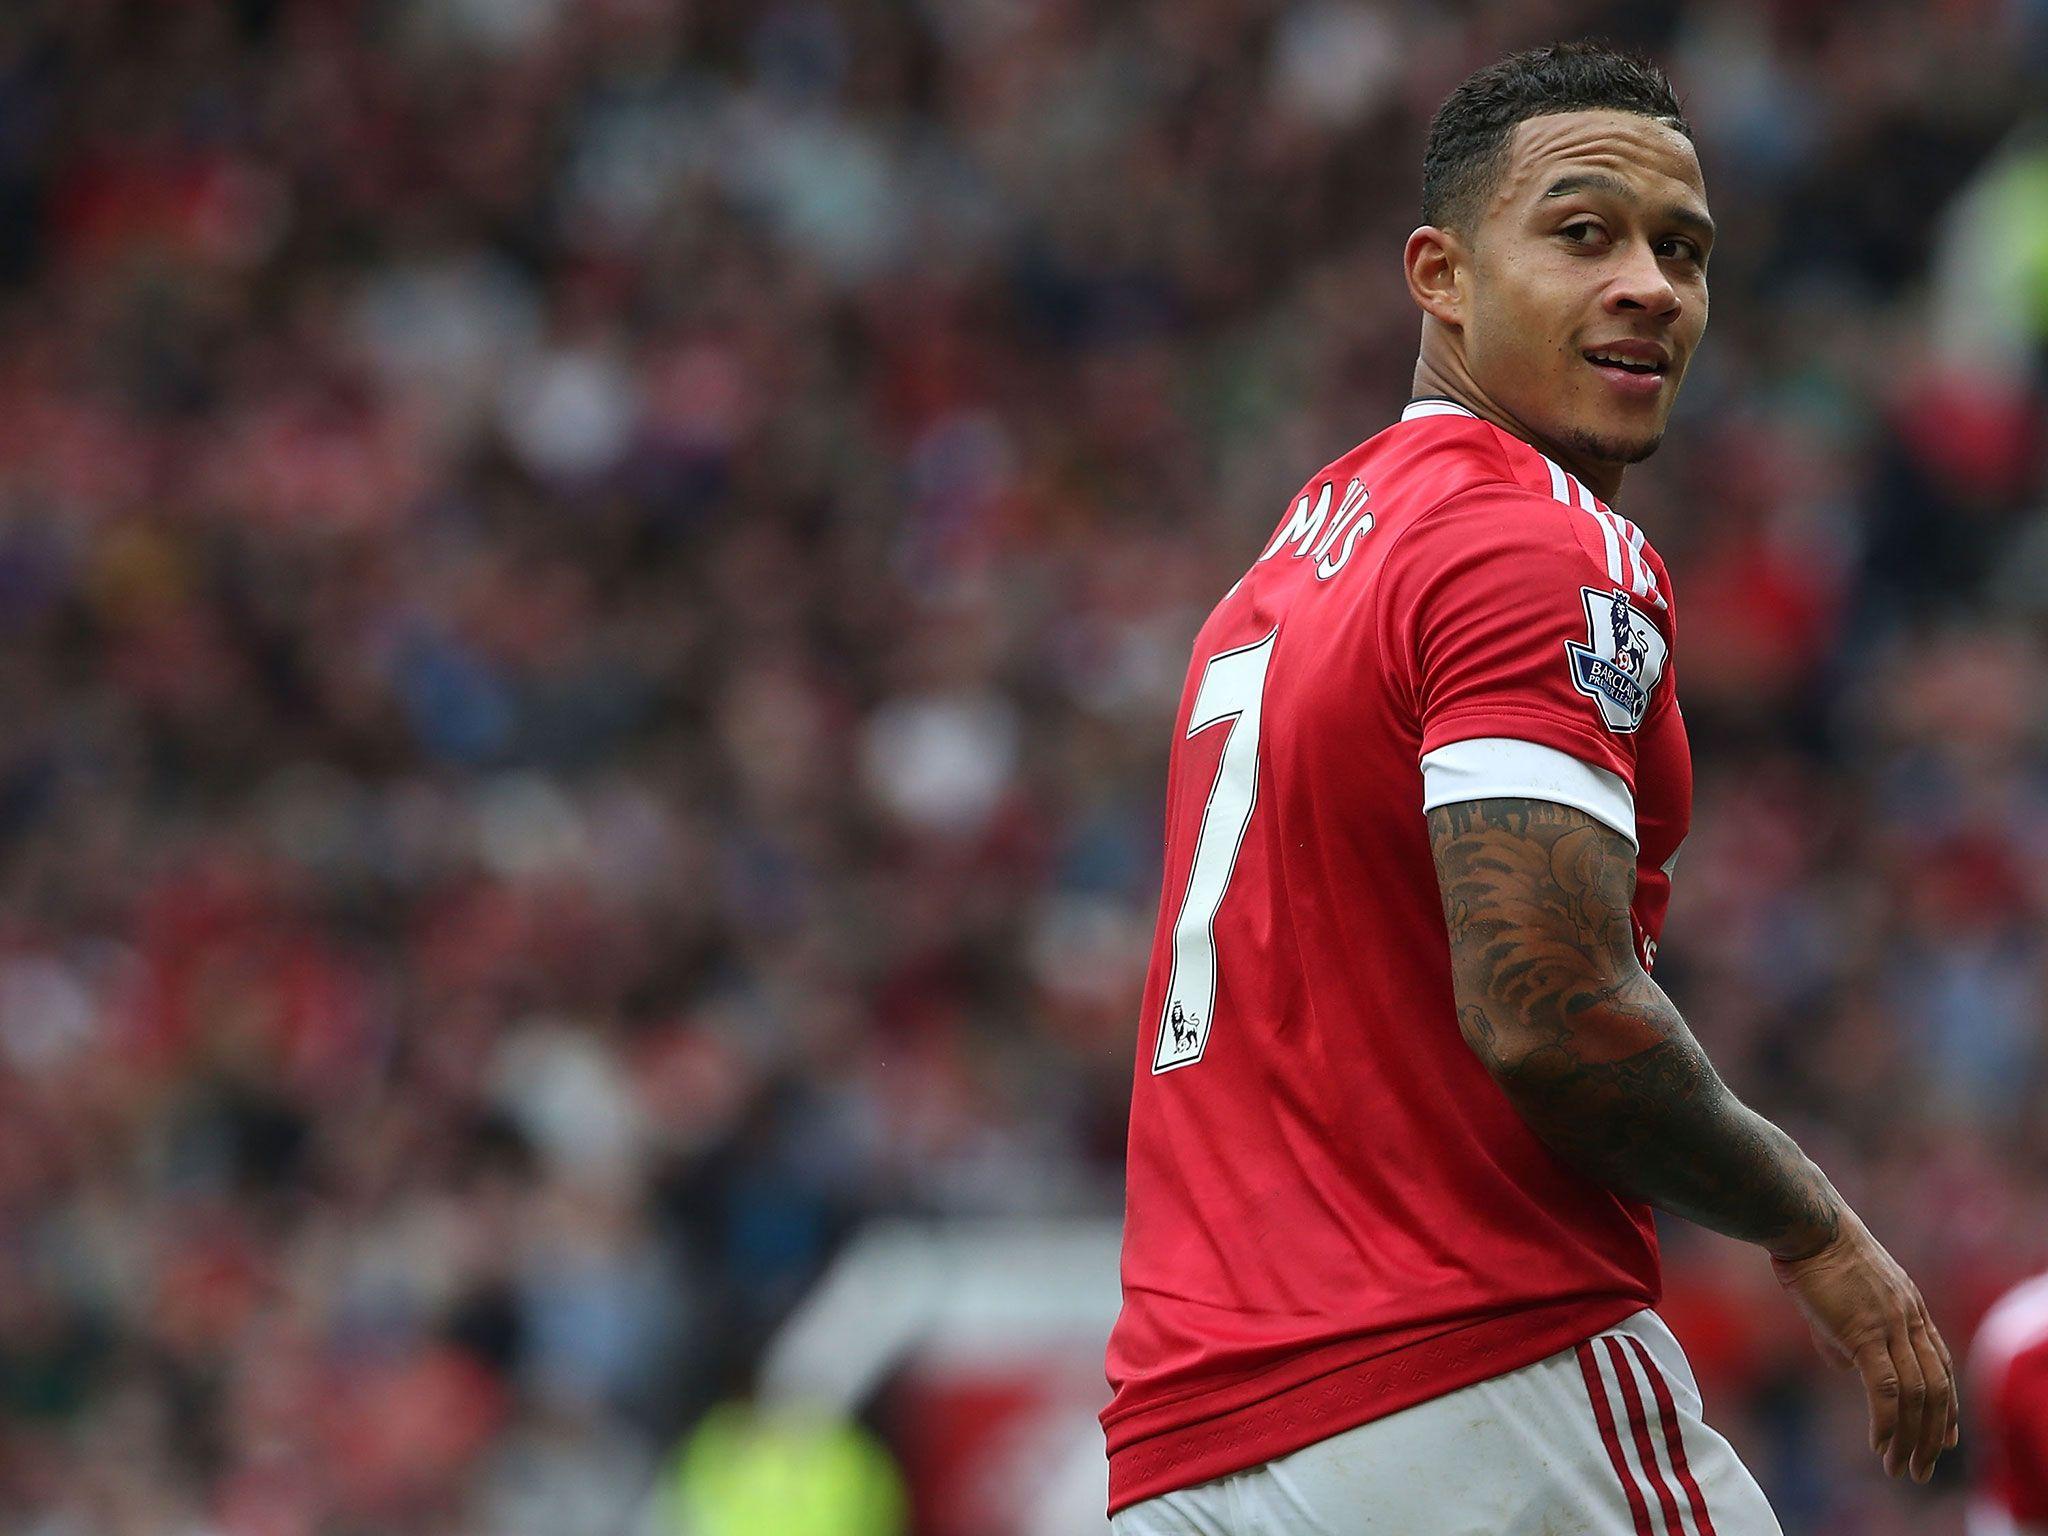 Memphis Depay reveals he gained five kilos and 'fell back' at